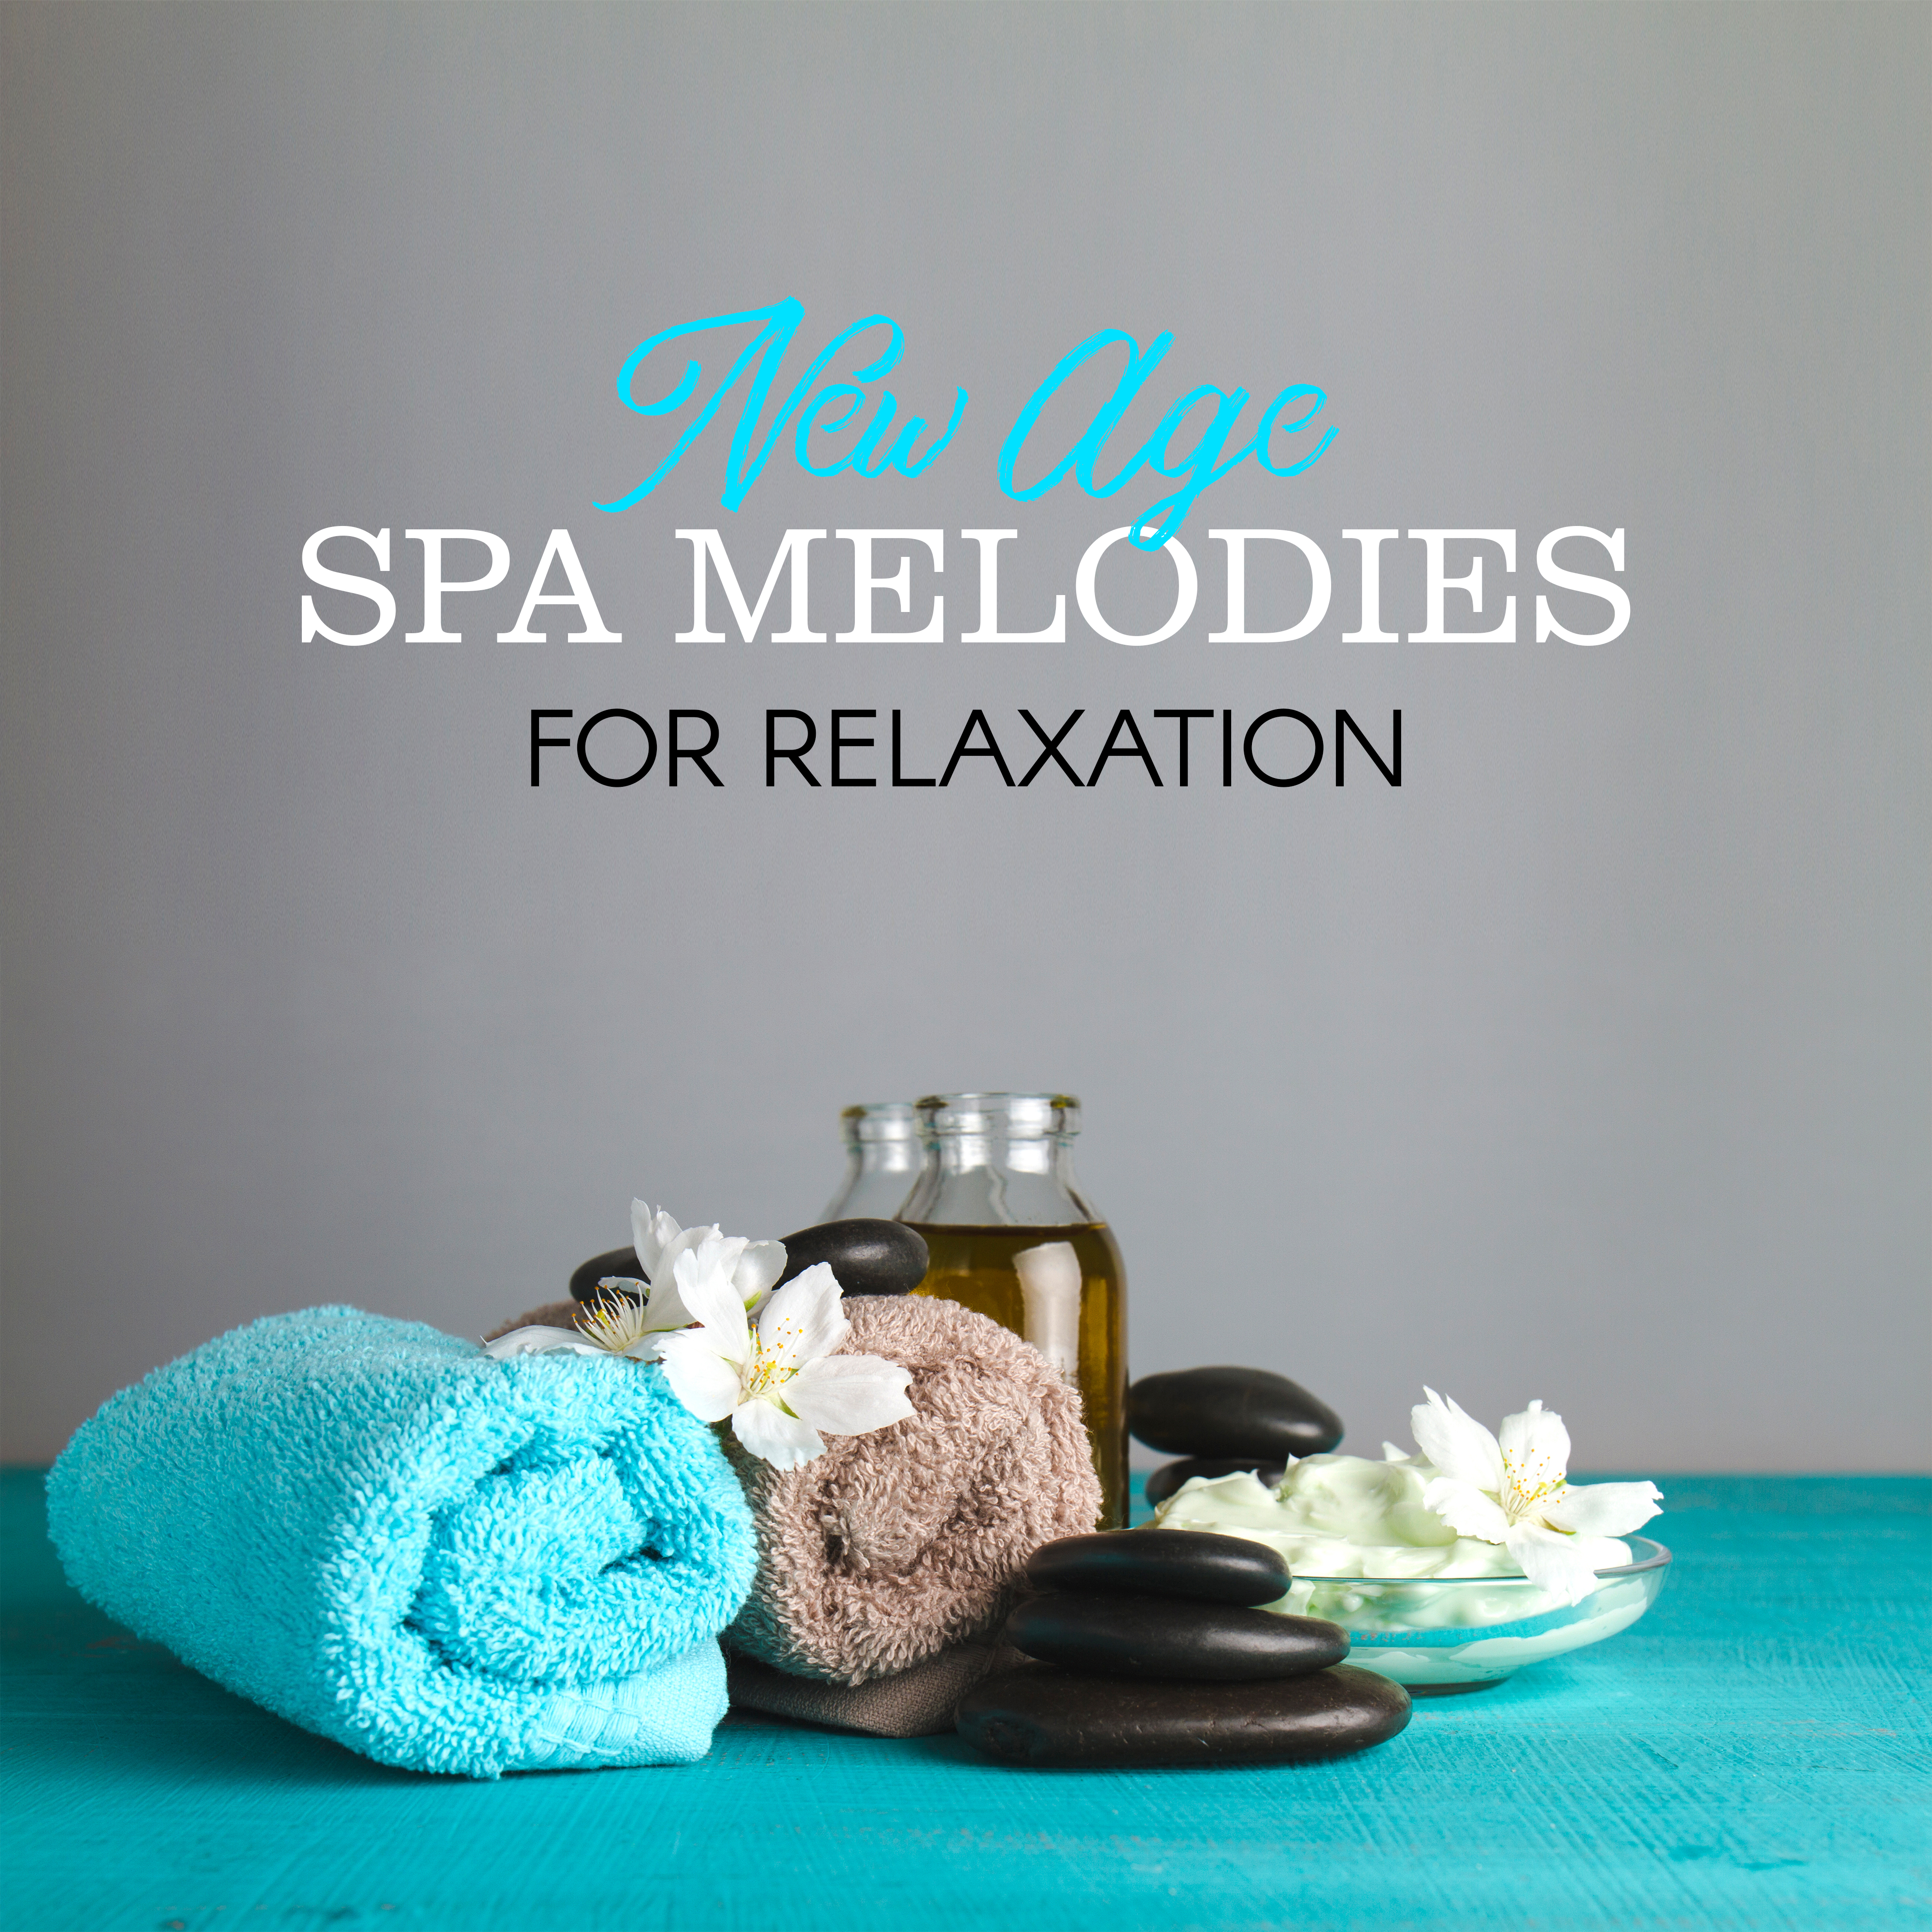 New Age Spa Melodies for Relaxation